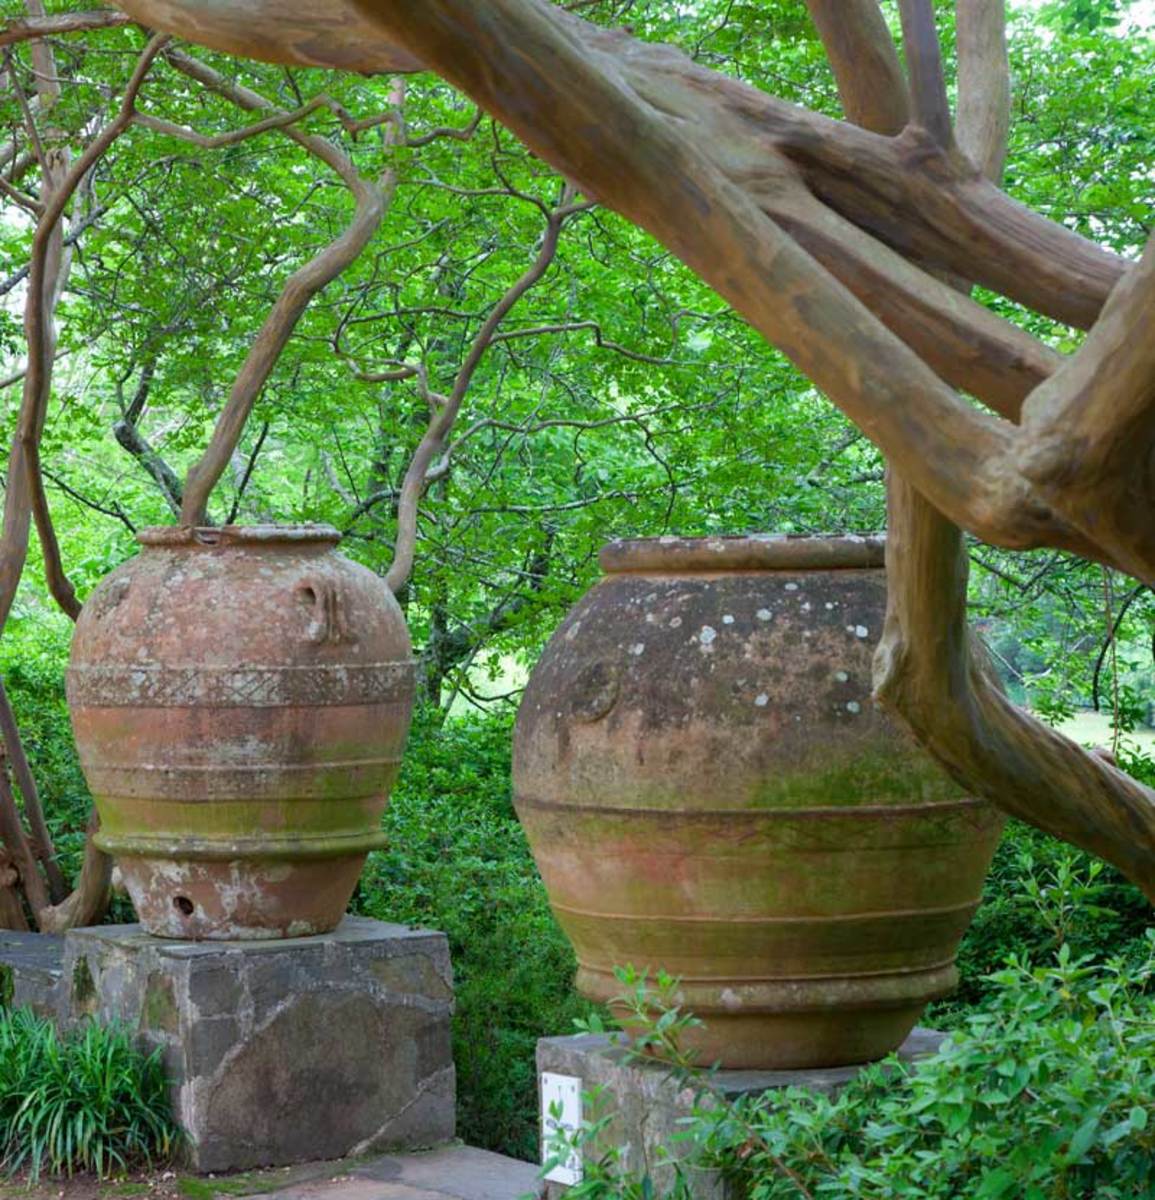 two giant wine and olive jars, Grecian garden